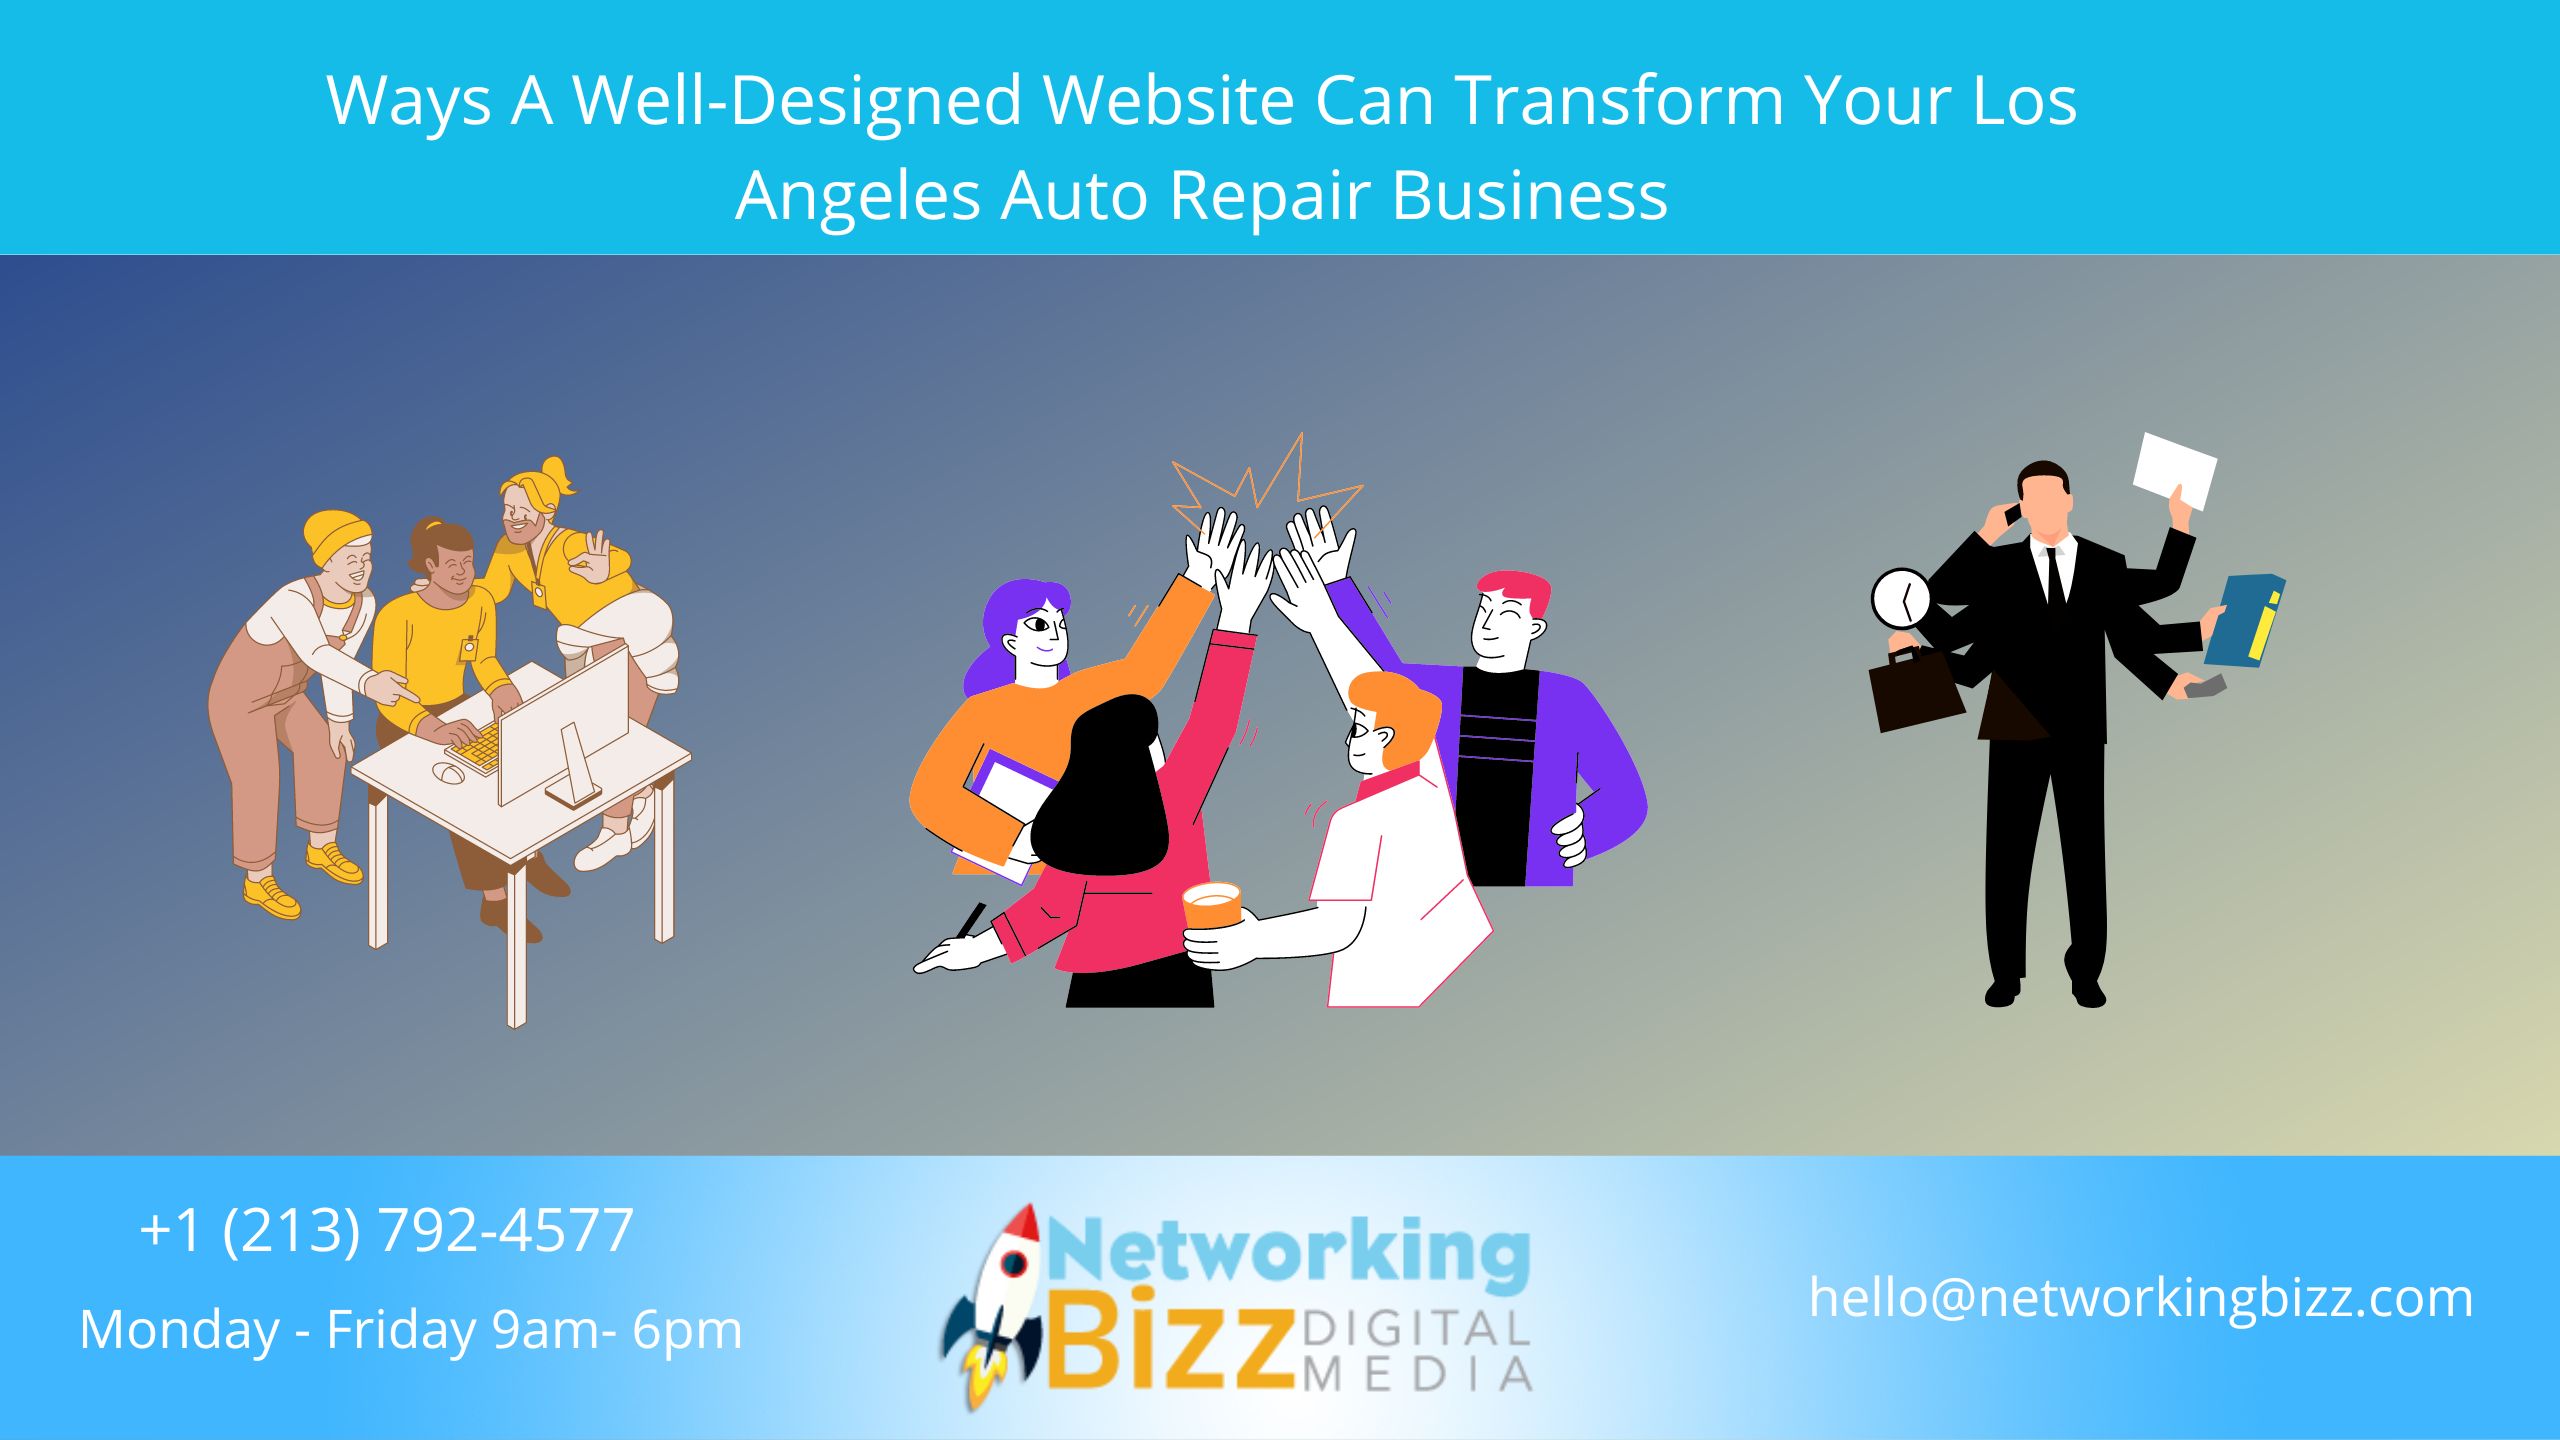 Ways A Well-Designed Website Can Transform Your Los Angeles Auto Repair Business